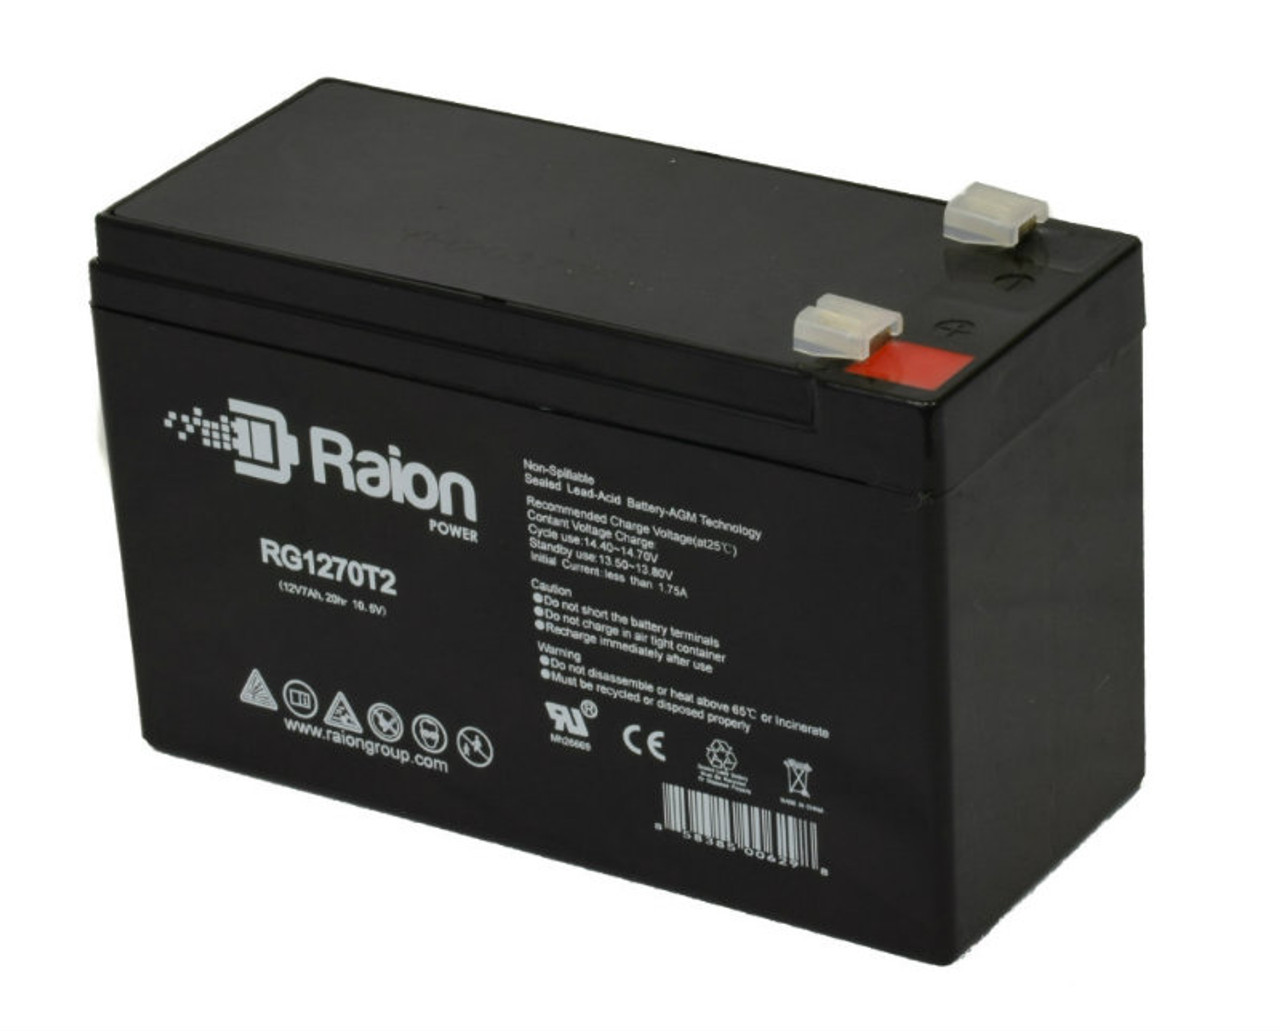 Raion Power RG1270T1 12V 7Ah Non-Spillable Replacement Battery for Arjo-Century Alpine 600